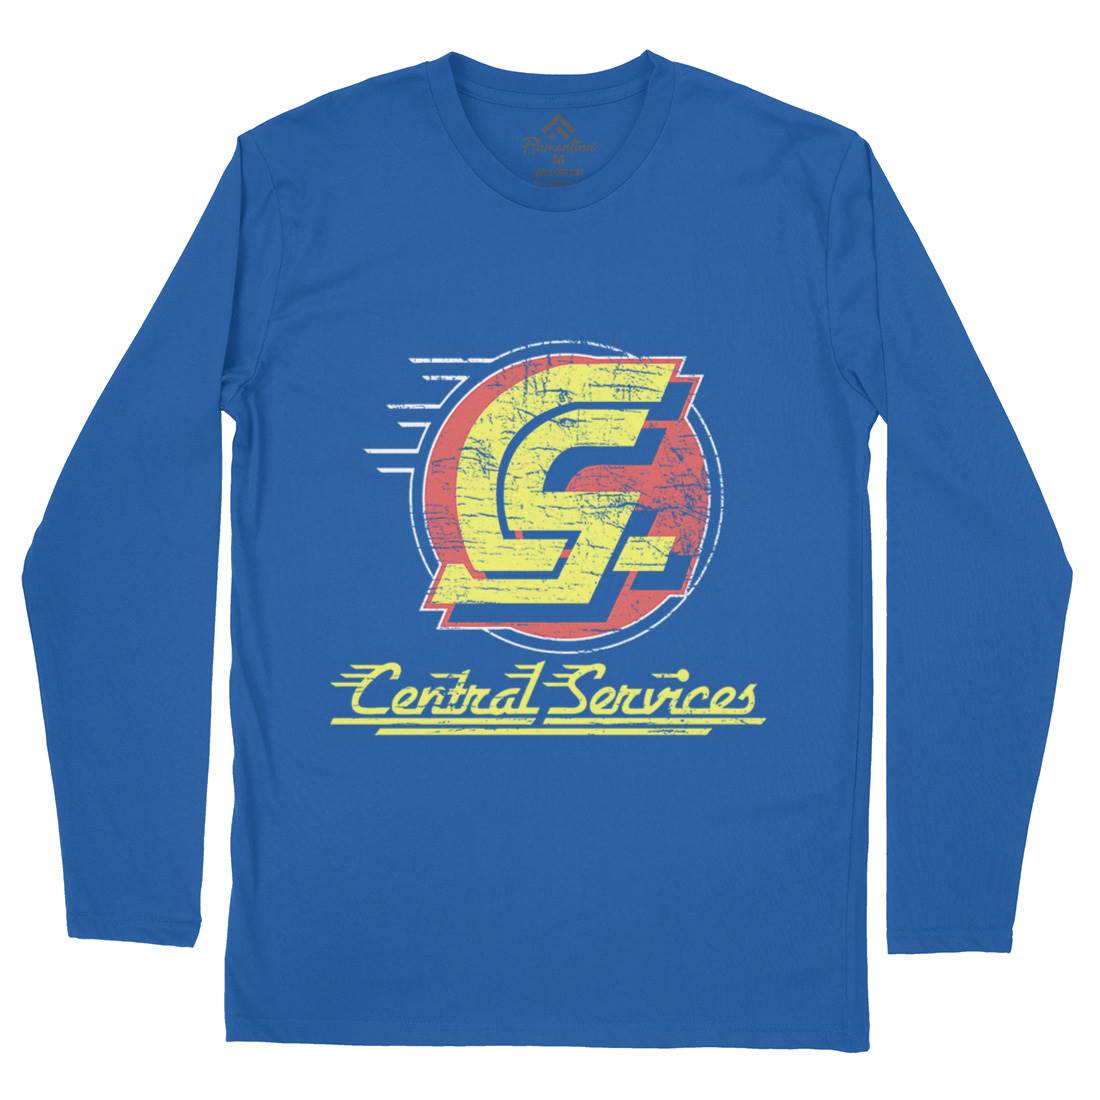 Central Services Mens Long Sleeve T-Shirt Space D250